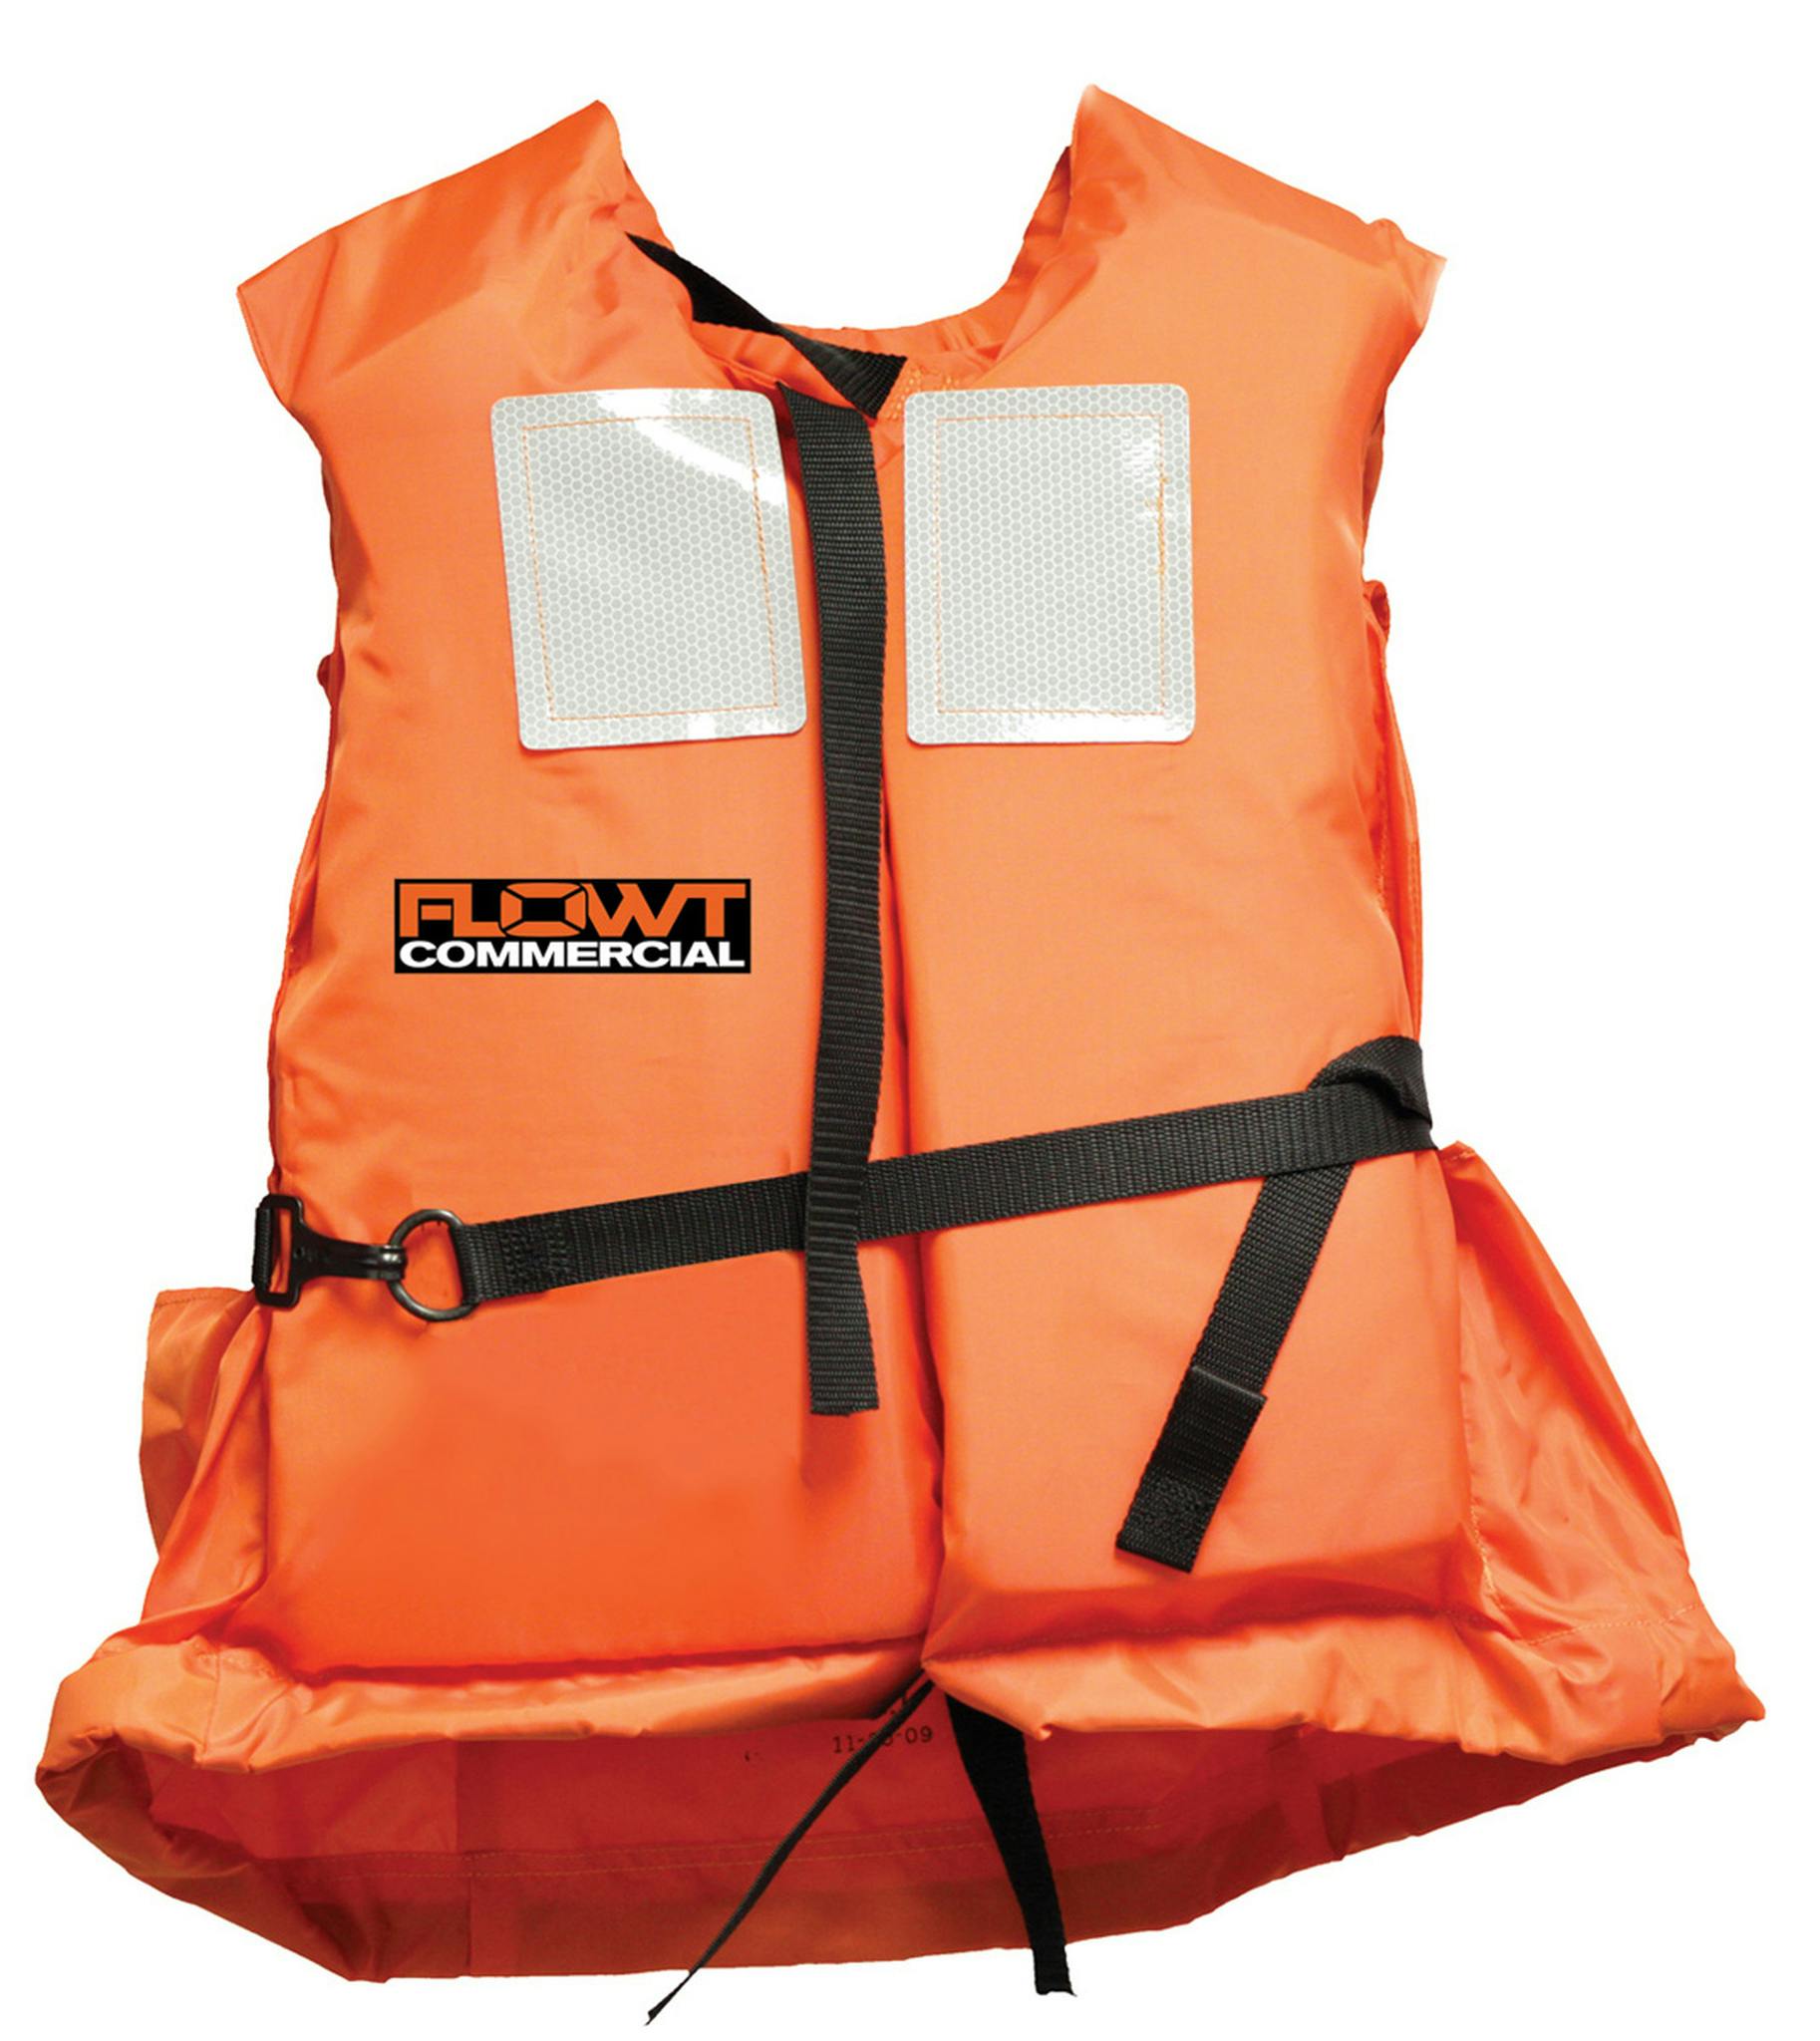 Flowt Commercial Off-Shore Performance Life Jacket - Type I, USCG Approved 41200-UNV